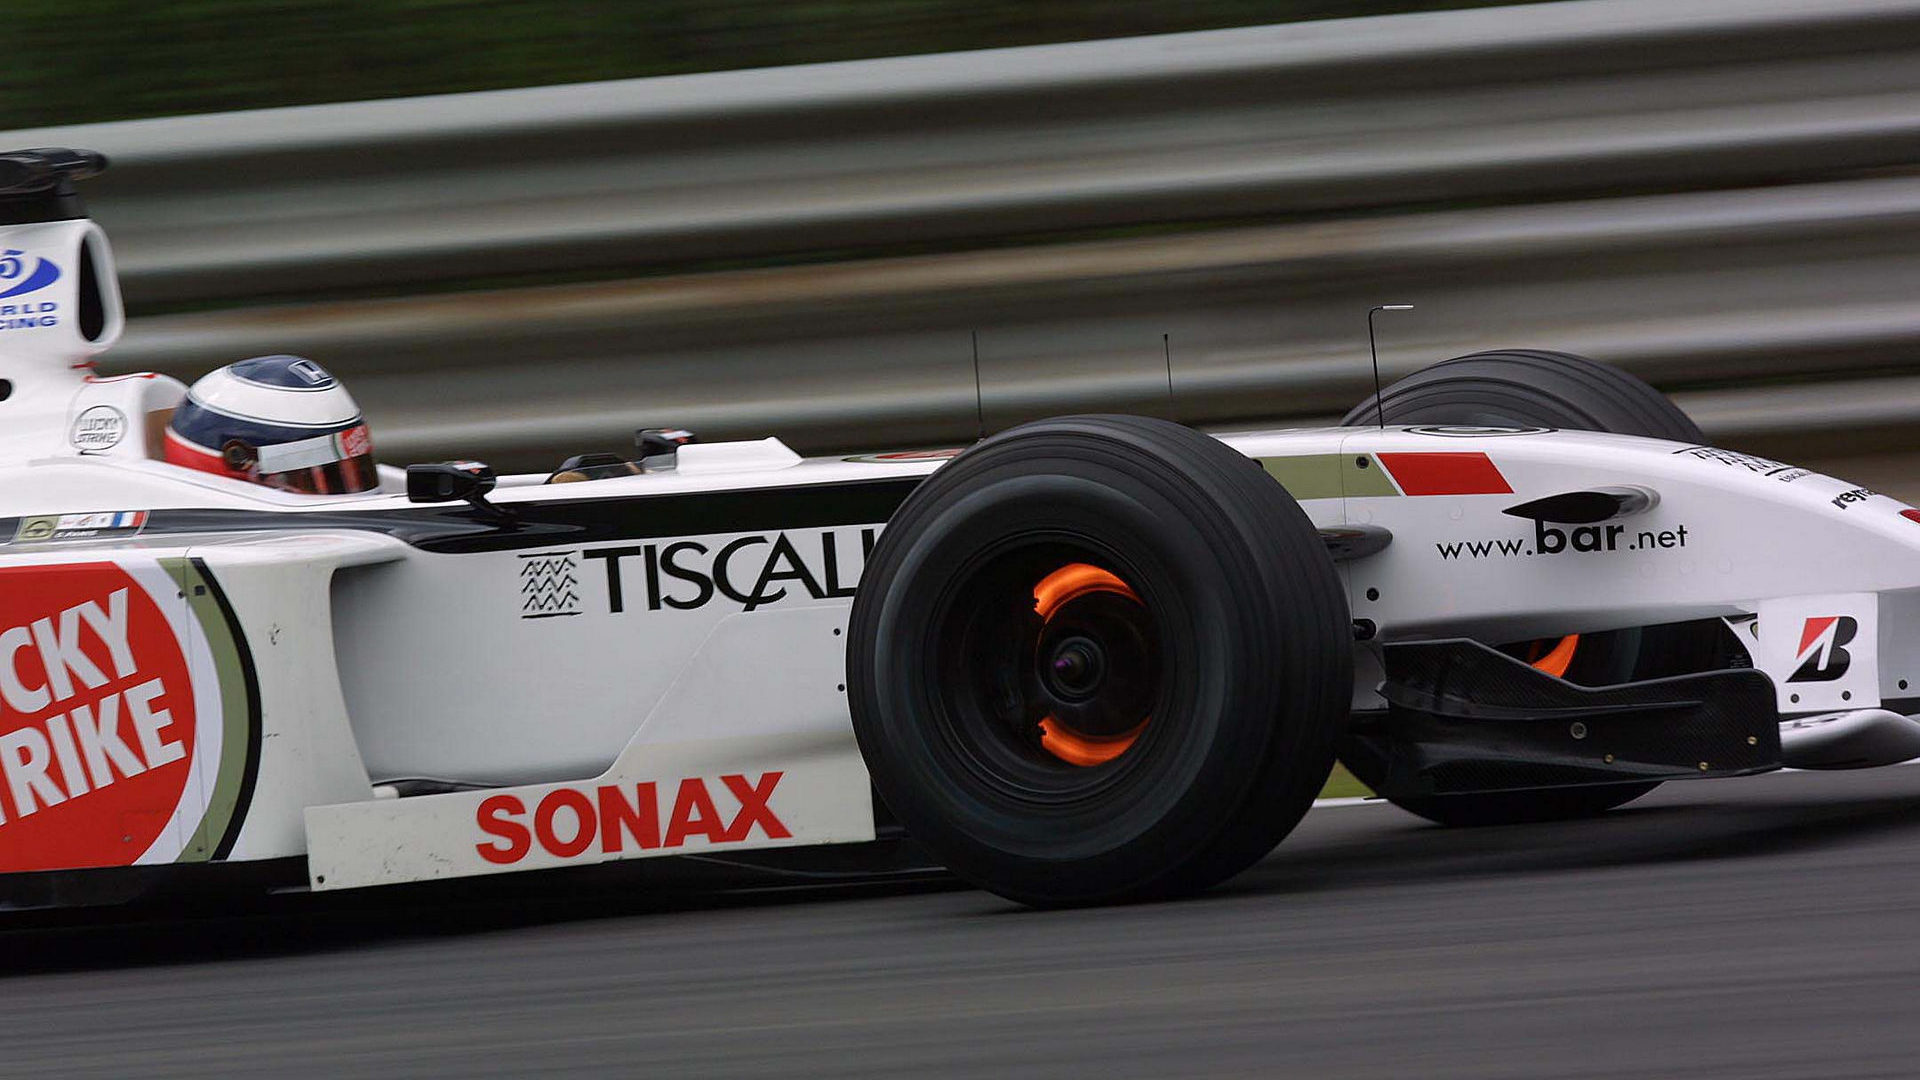 HD Wallpapers 2001 Formula 1 Grand Prix of Italy | F1 Fansite